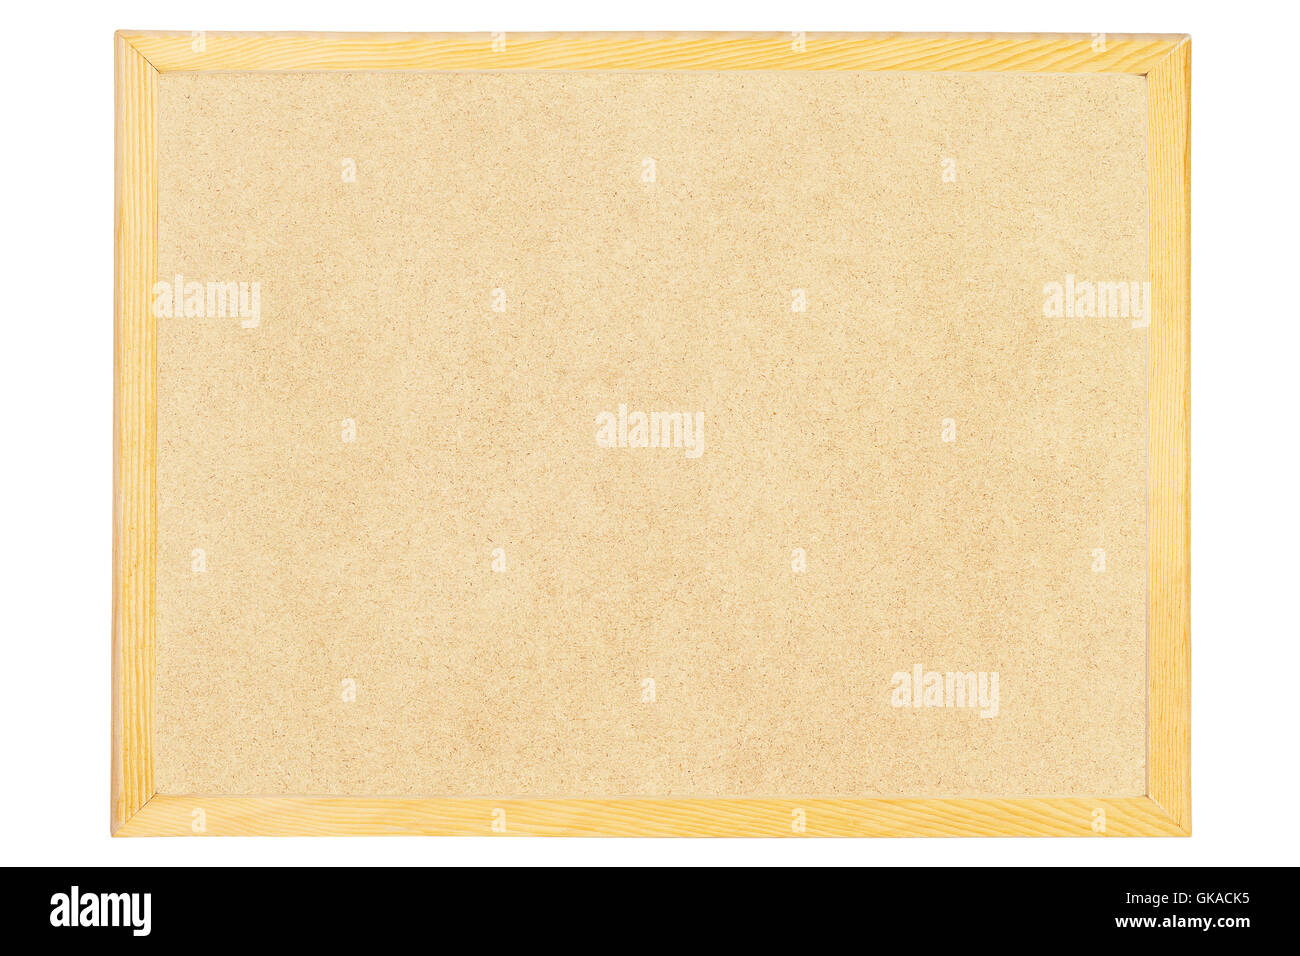 Blank Bulletin Board With Wooden Frame on White Background Stock Photo